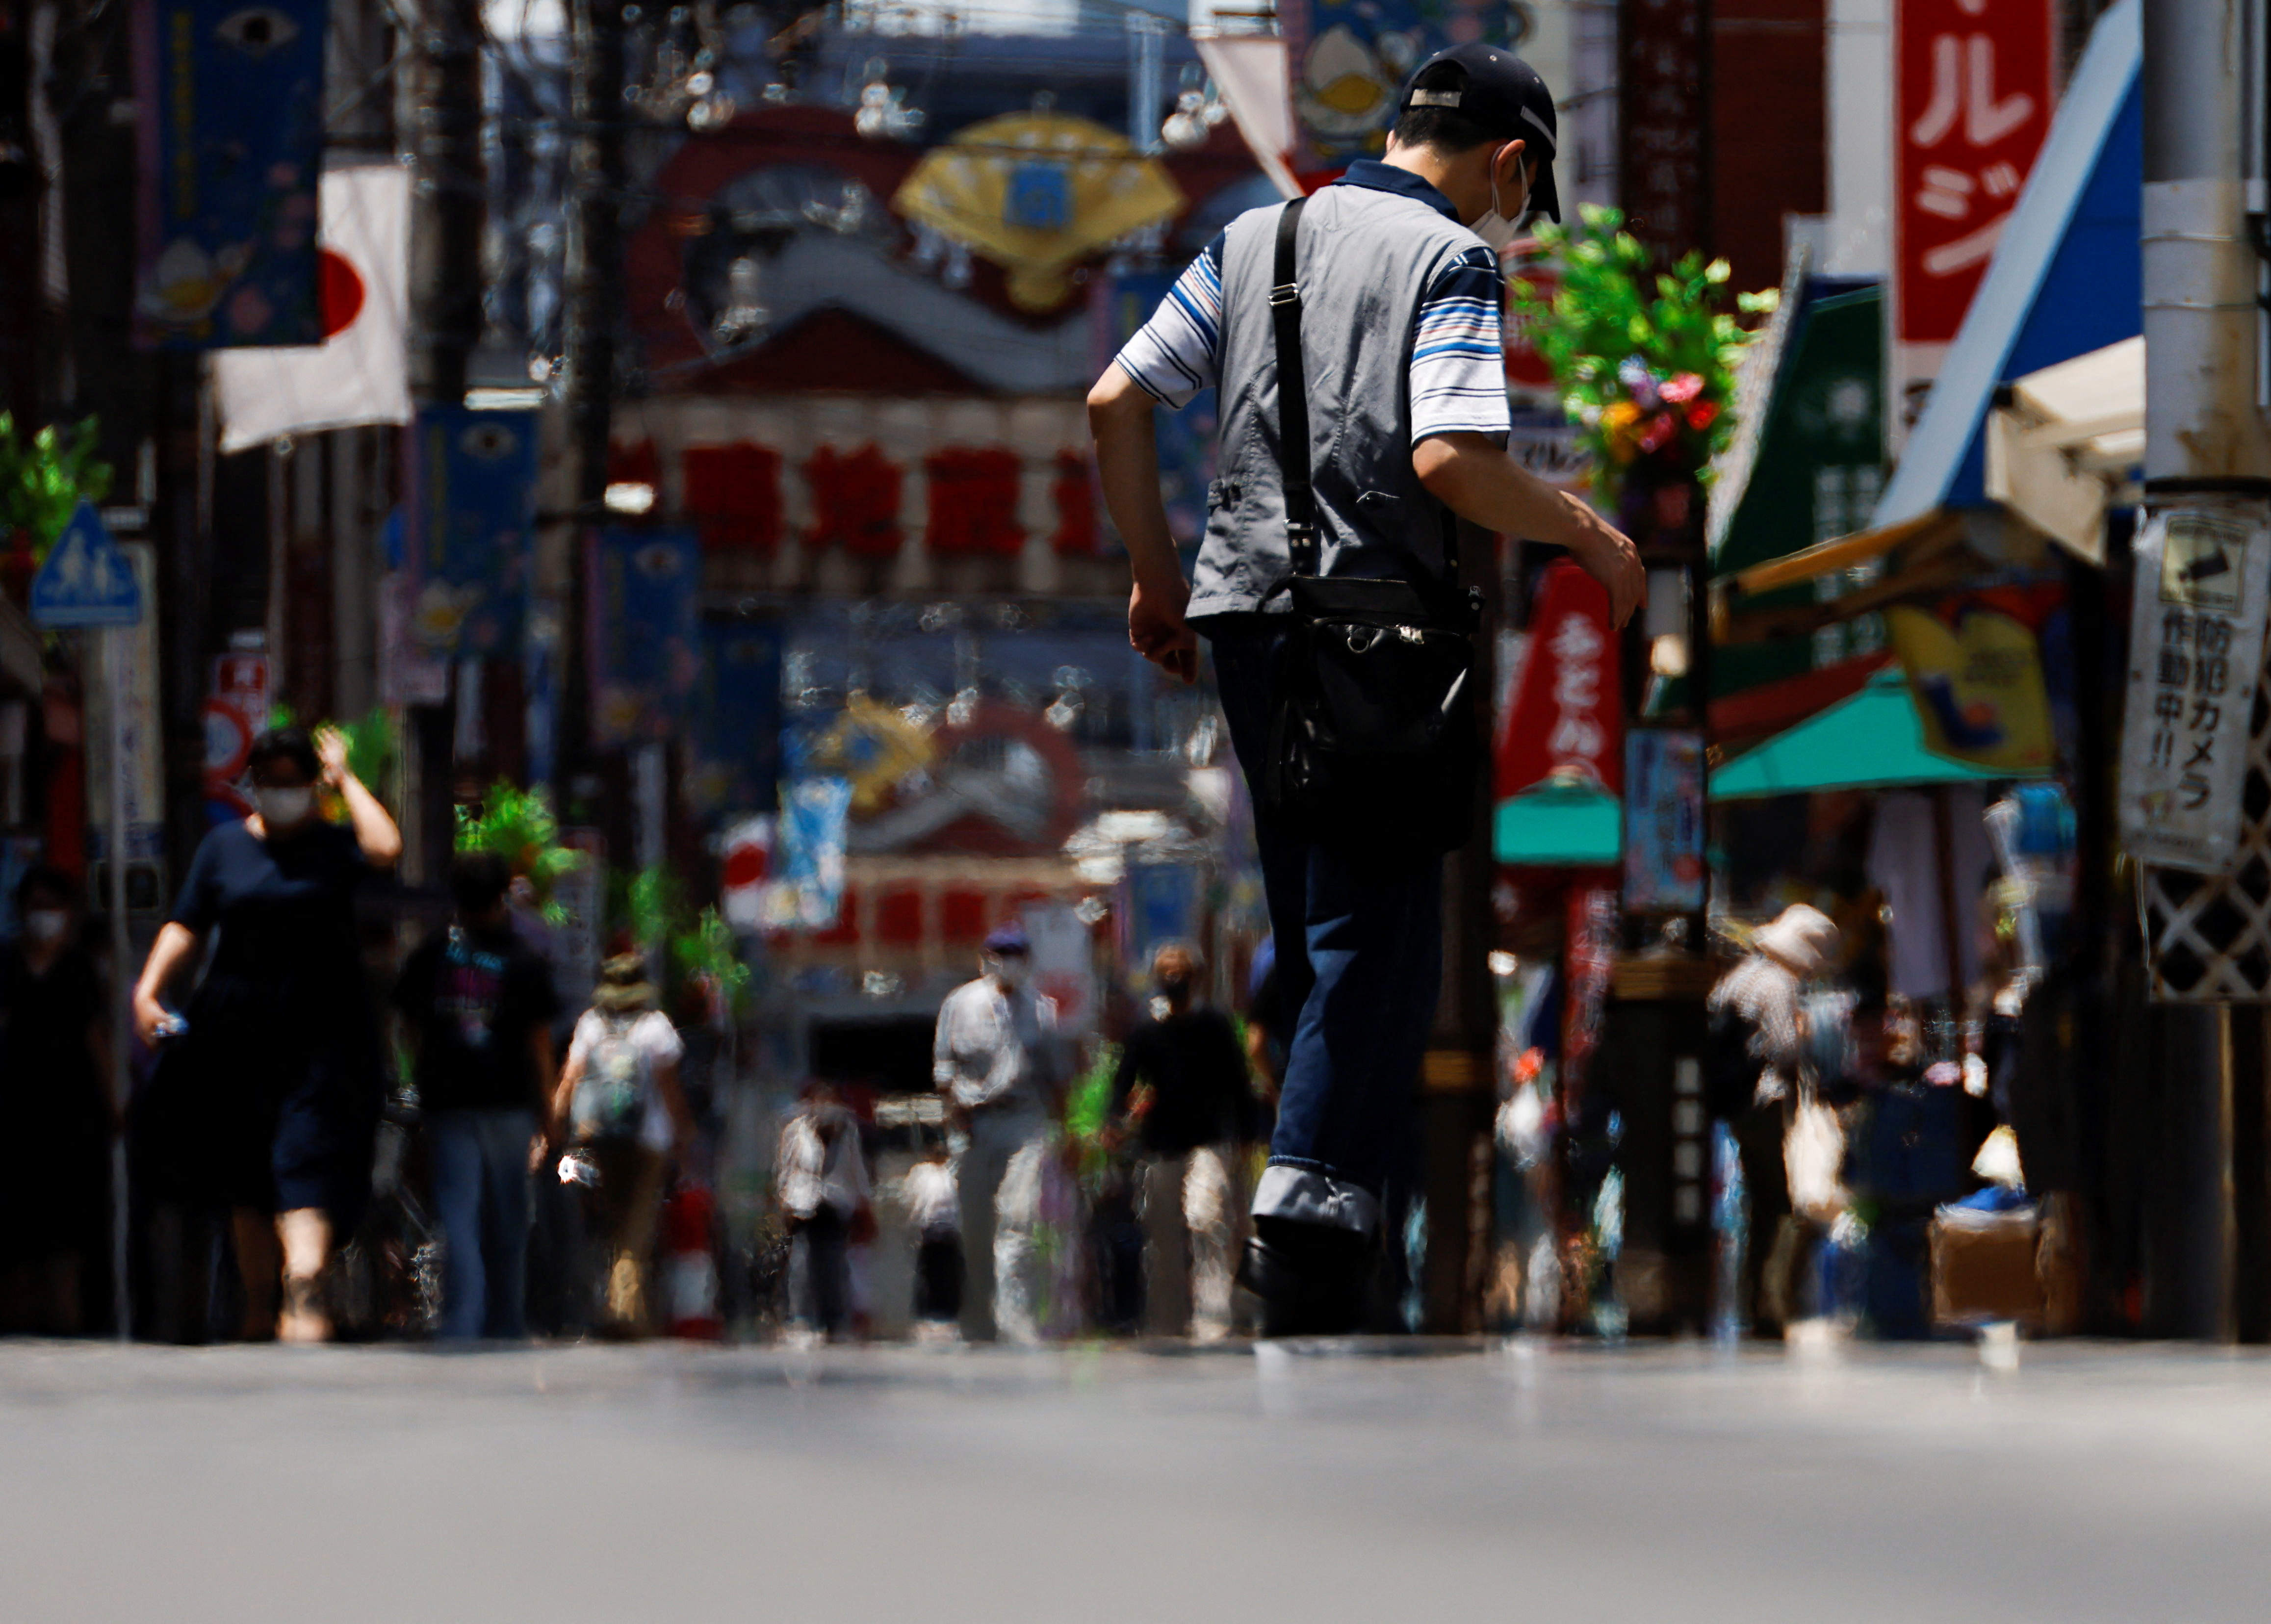 Passersby are seen through a heat haze during hot weather at Sugamo district in Tokyo